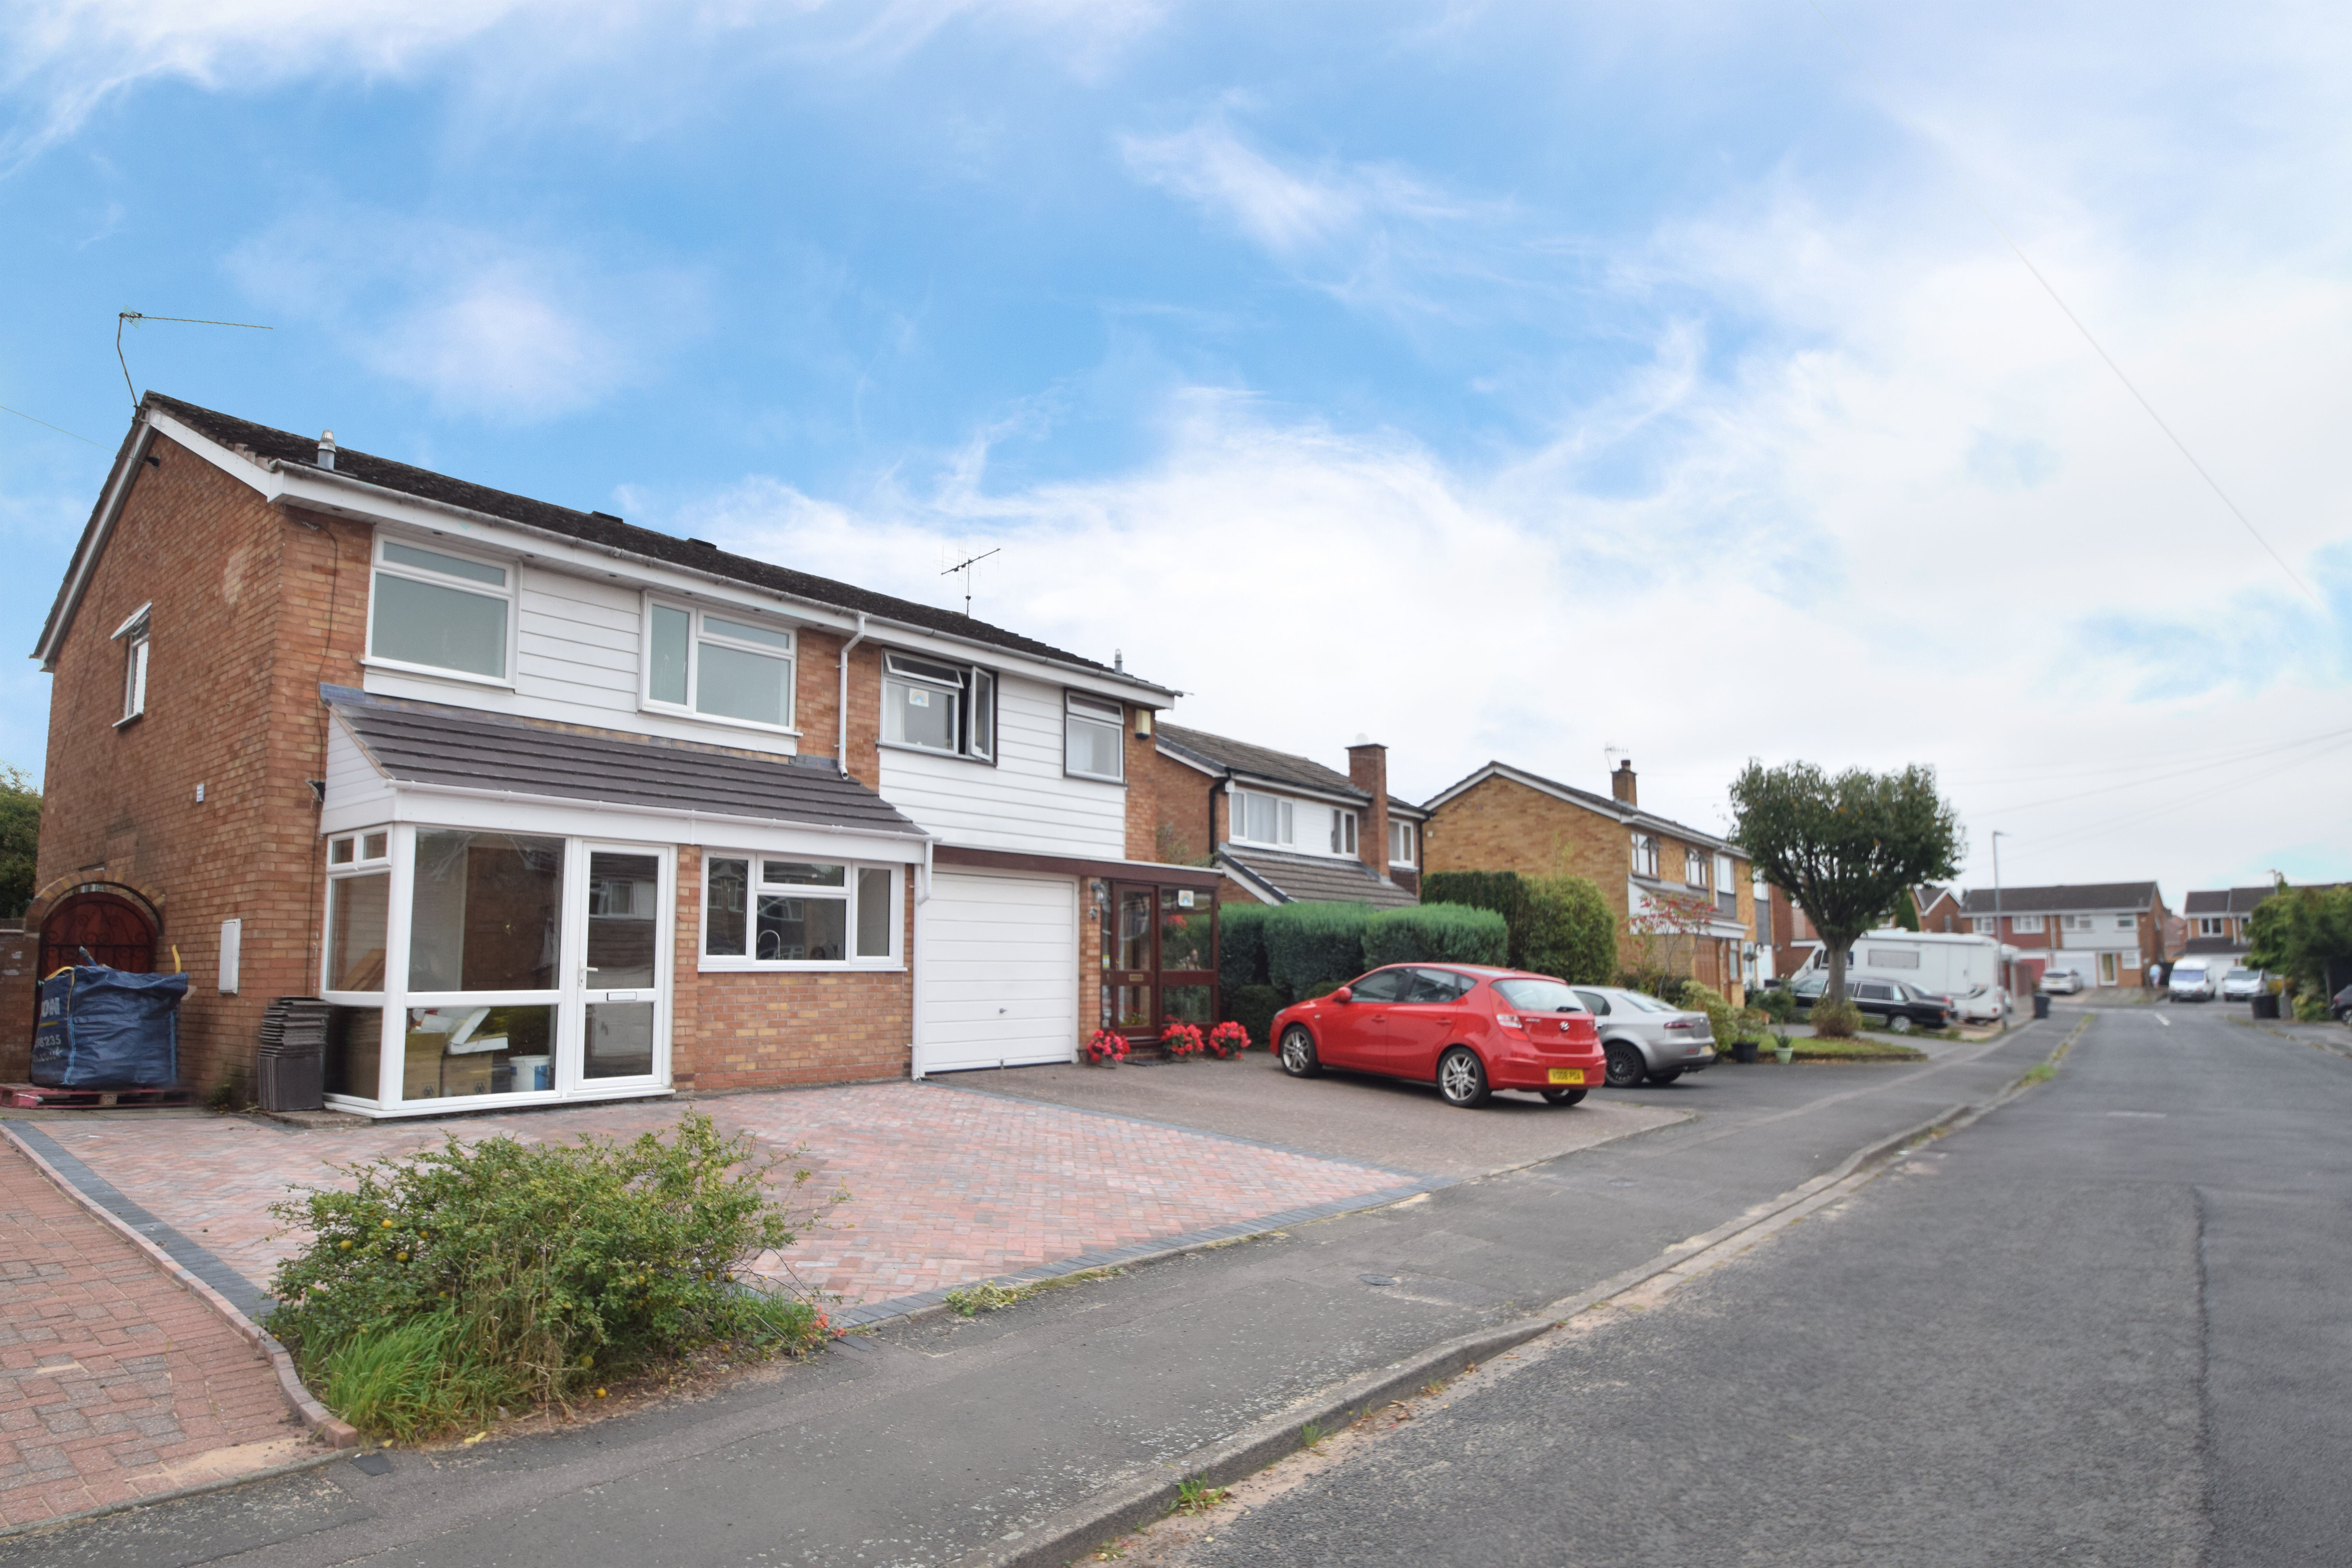 3 bed house to rent in Chadcote Way, Catshill - Property Image 1